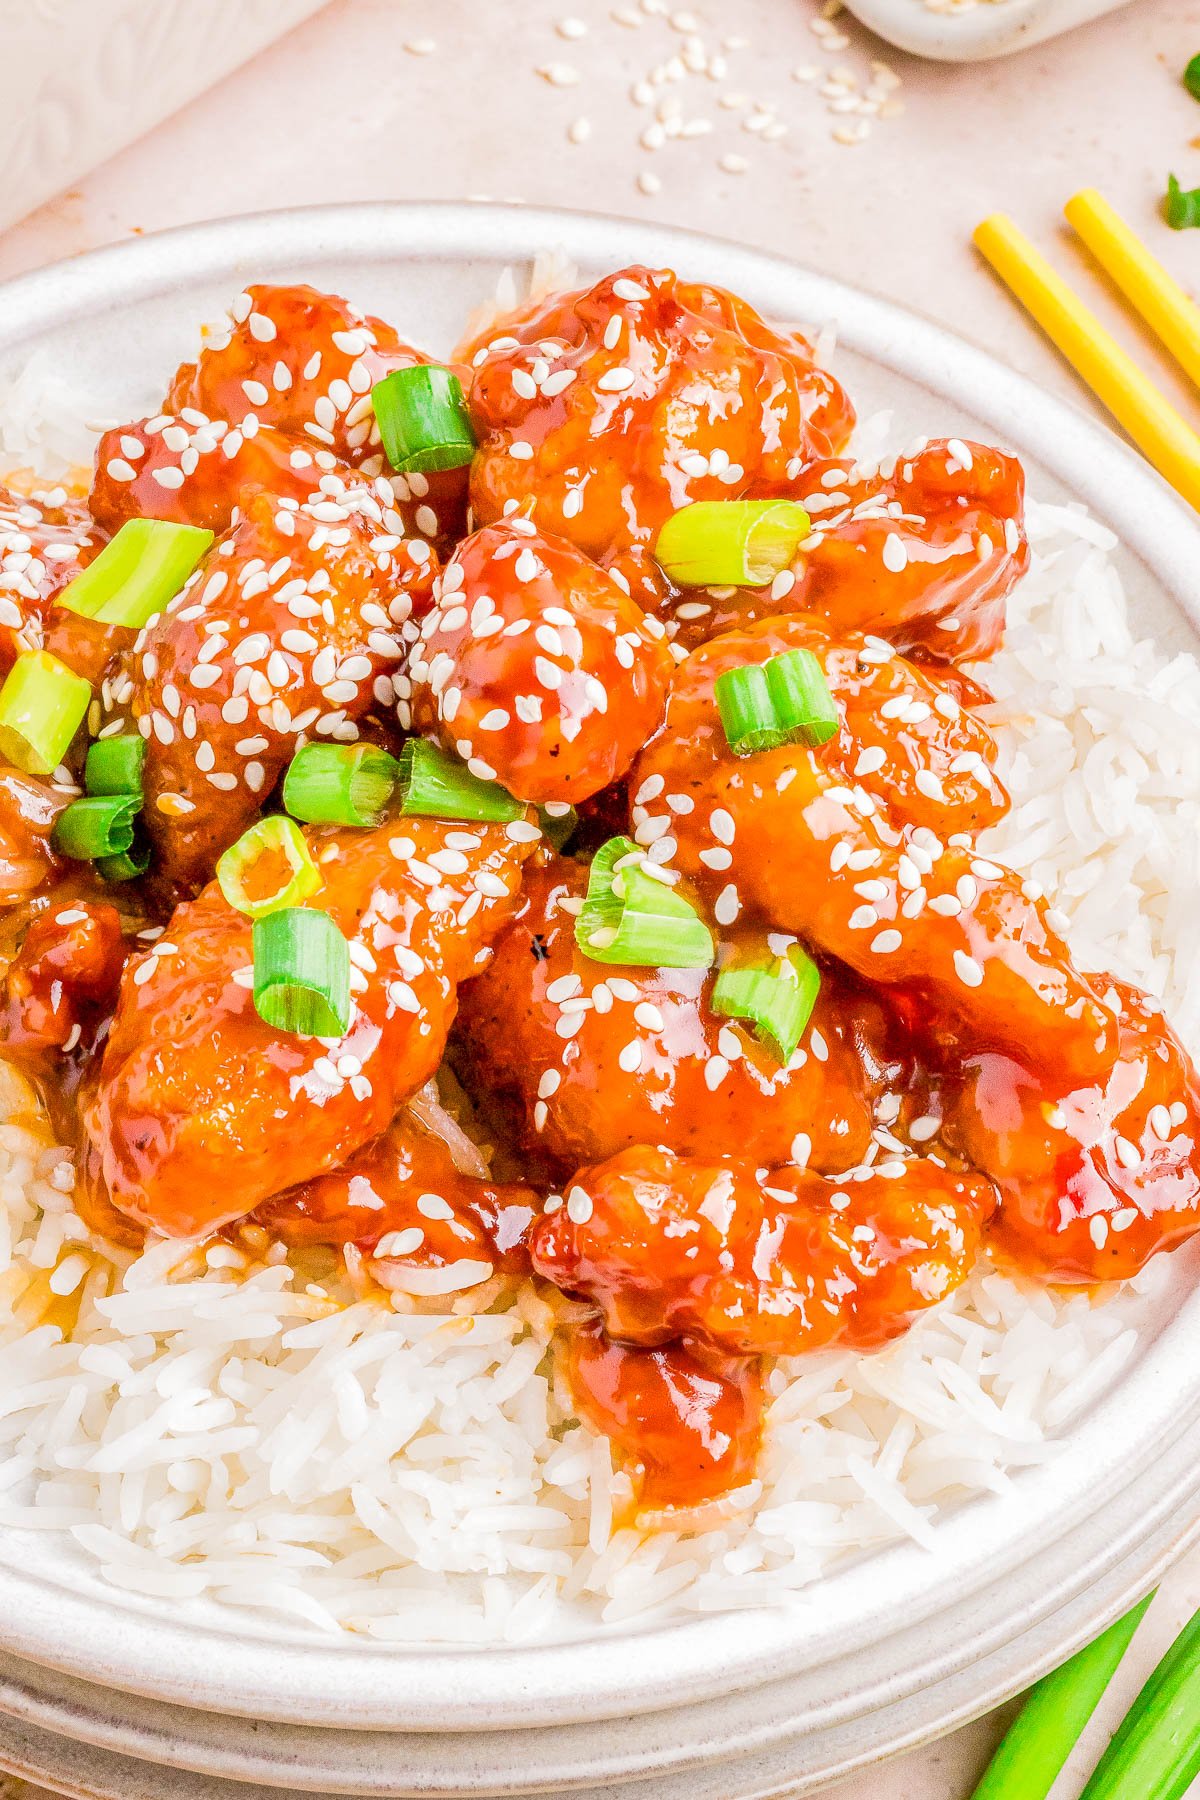 A plate of sesame chicken served over white rice, garnished with green onions and sesame seeds, with chopsticks on the side.